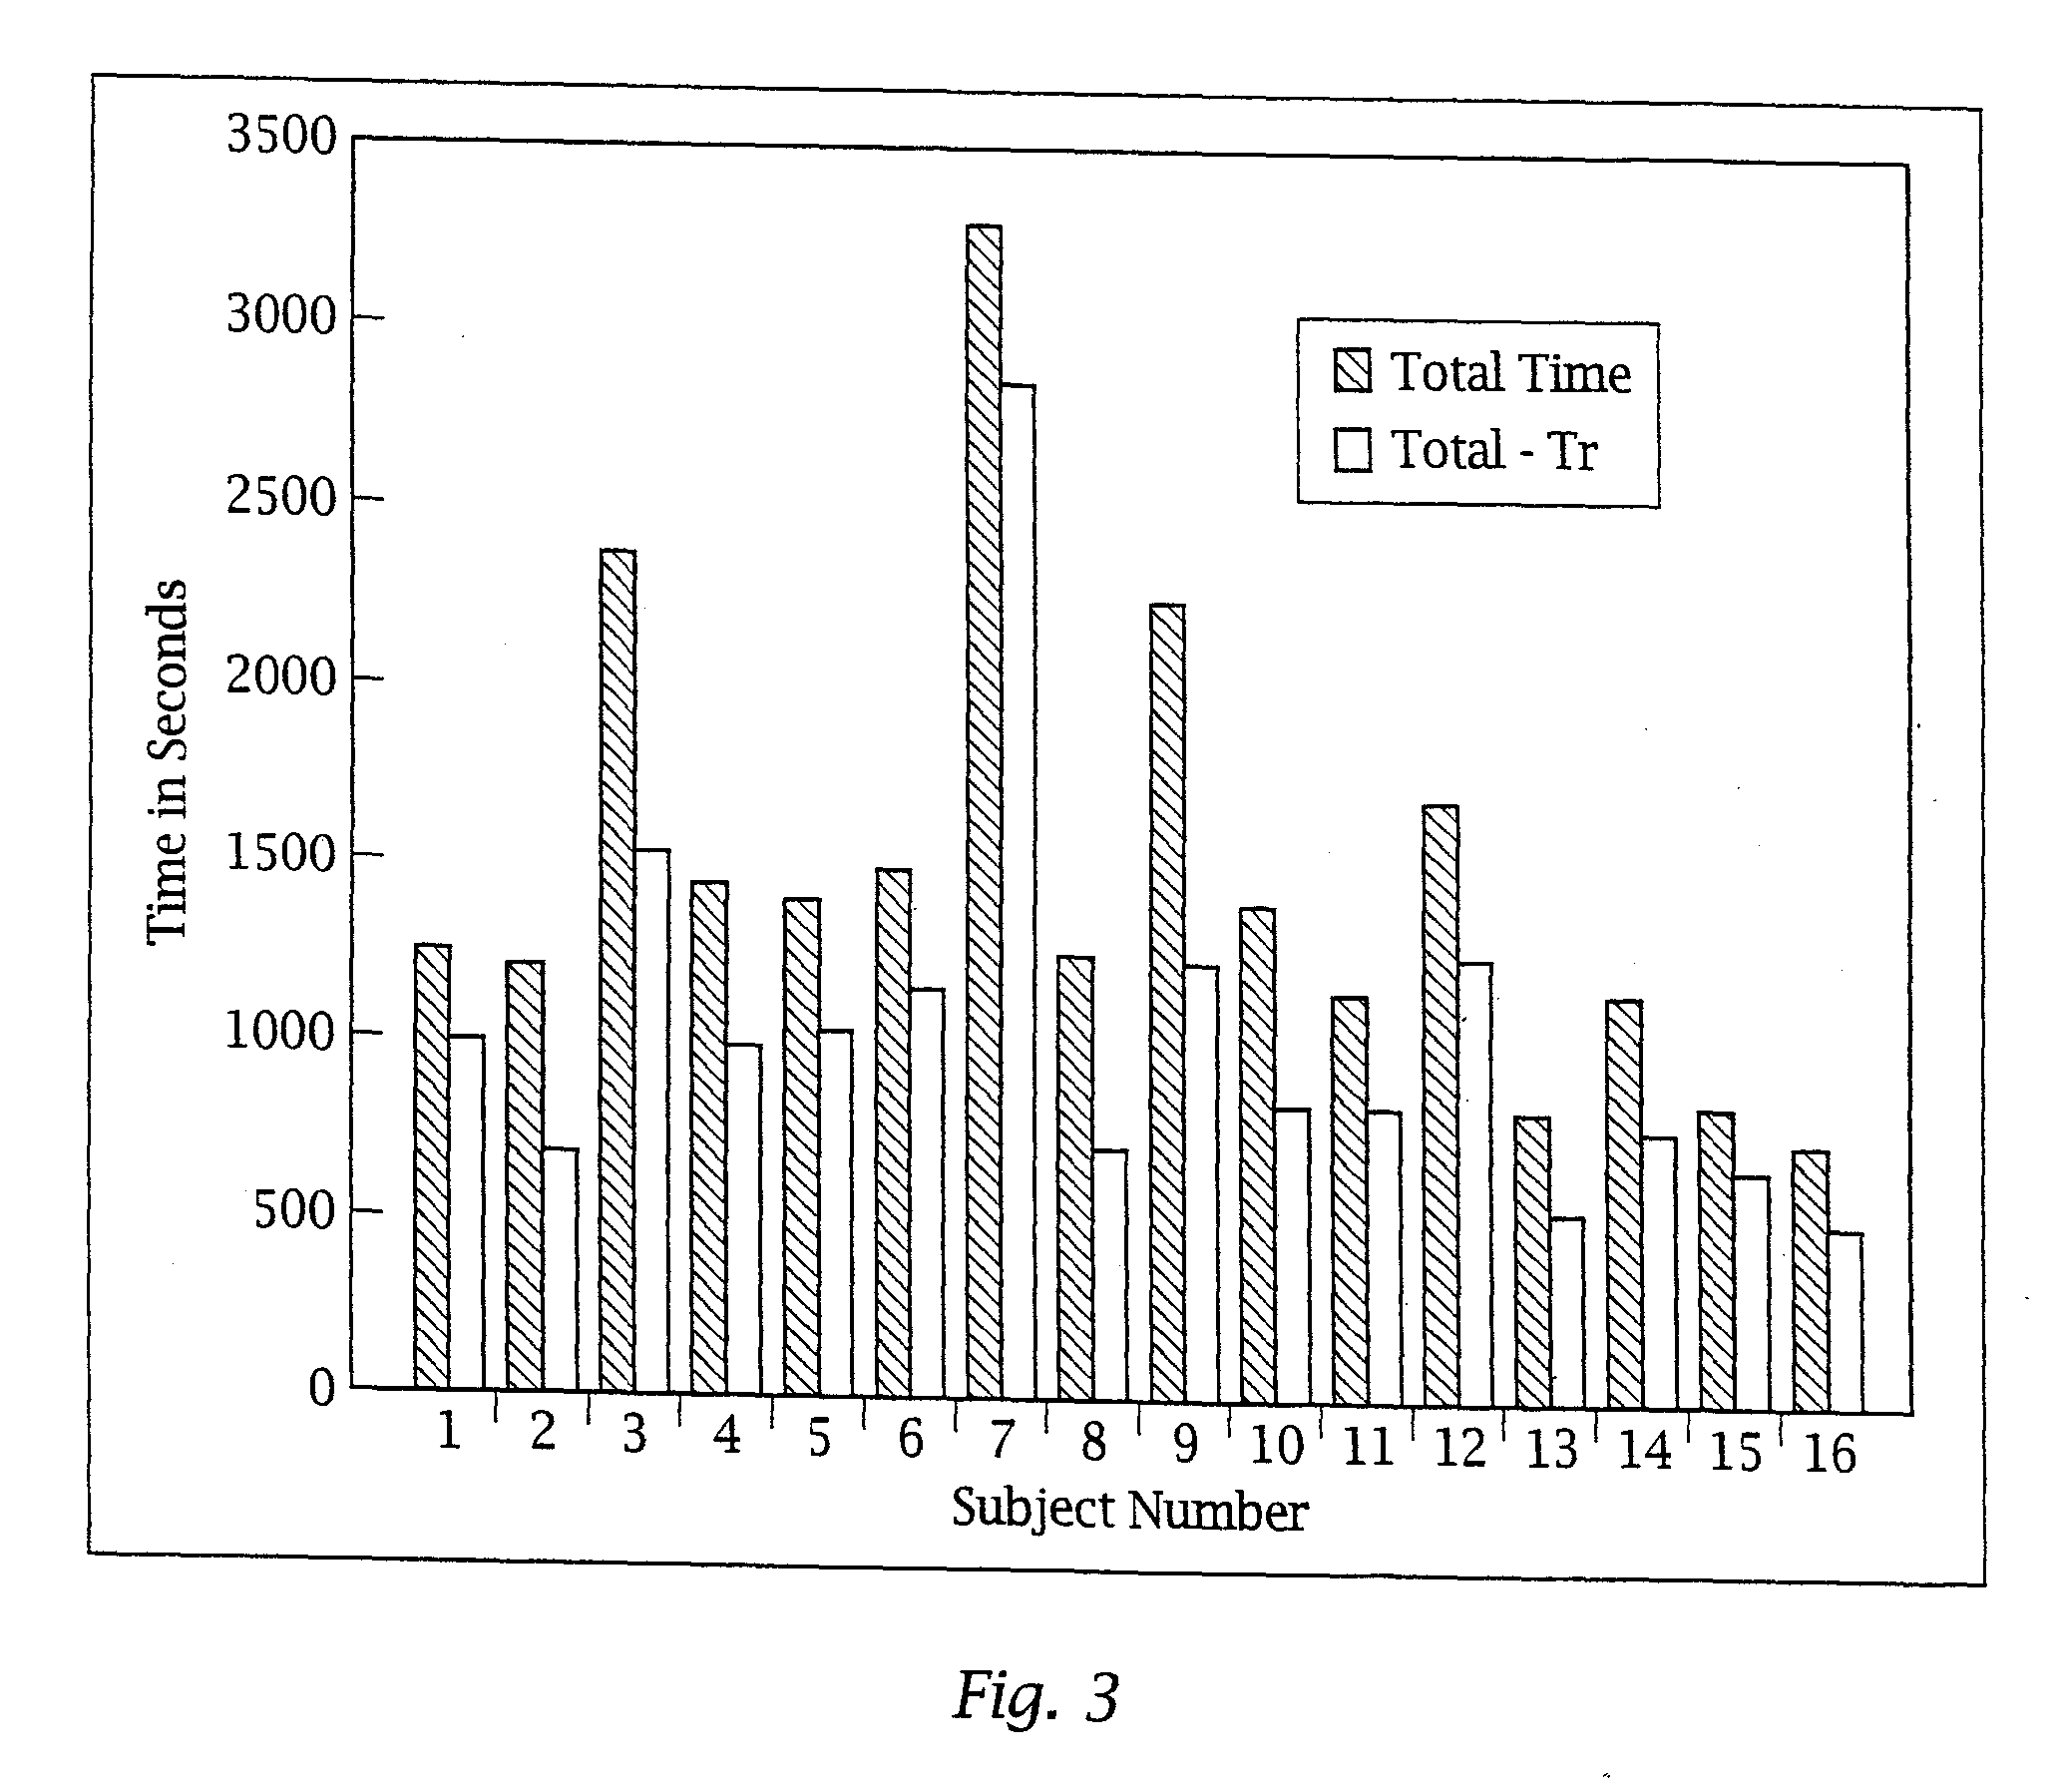 Adaptive pattern recognition based controller apparatus and method and human-factored interface therefore